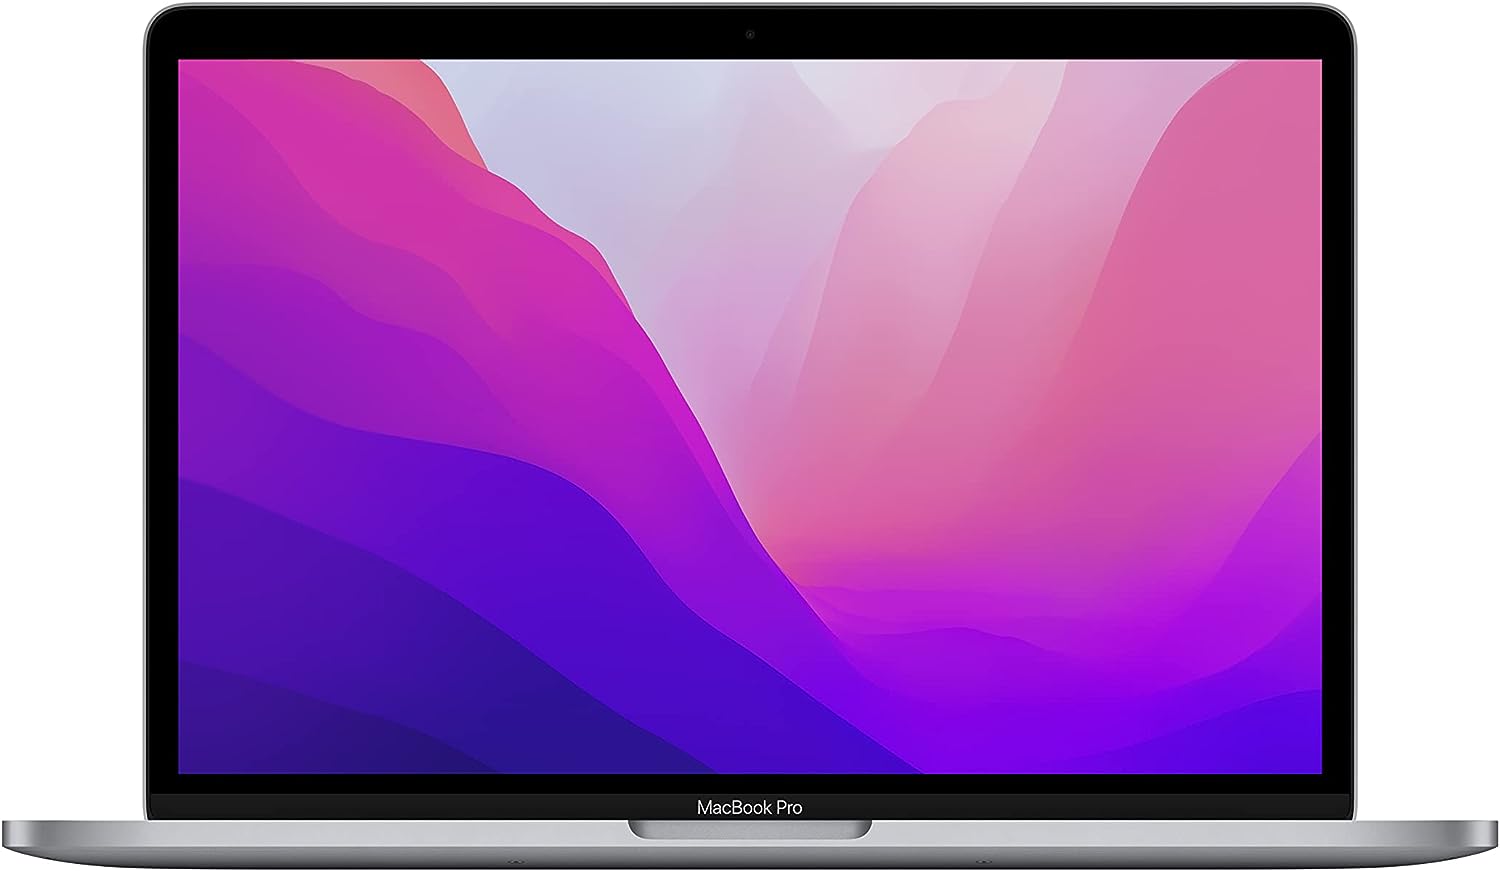 Apple 2022 MacBook Pro Laptop with M2 Chip: 13-Inch Retina Display, 8GB RAM, 256GB SSD Storage, Touch Bar, Backlit Keyboard, FaceTime HD Camera. Works with iPhone and iPad; Space Gray: Detailed Review & Recommendations